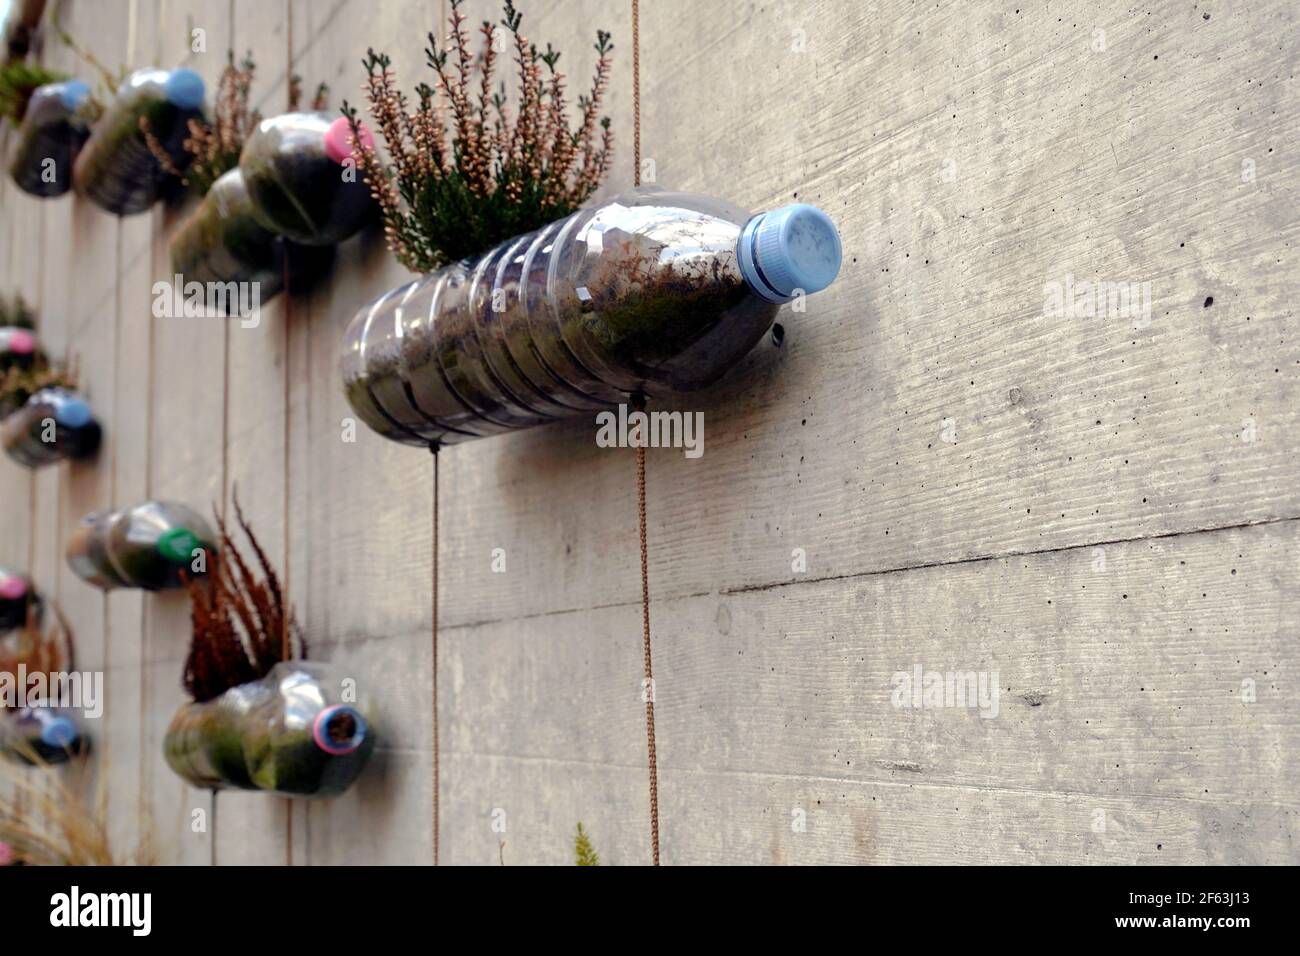 Upcycled plastic bottles with colorful caps transformed into do it yourself or hand made vertical garden fixed with strings on a concrete wall. Stock Photo